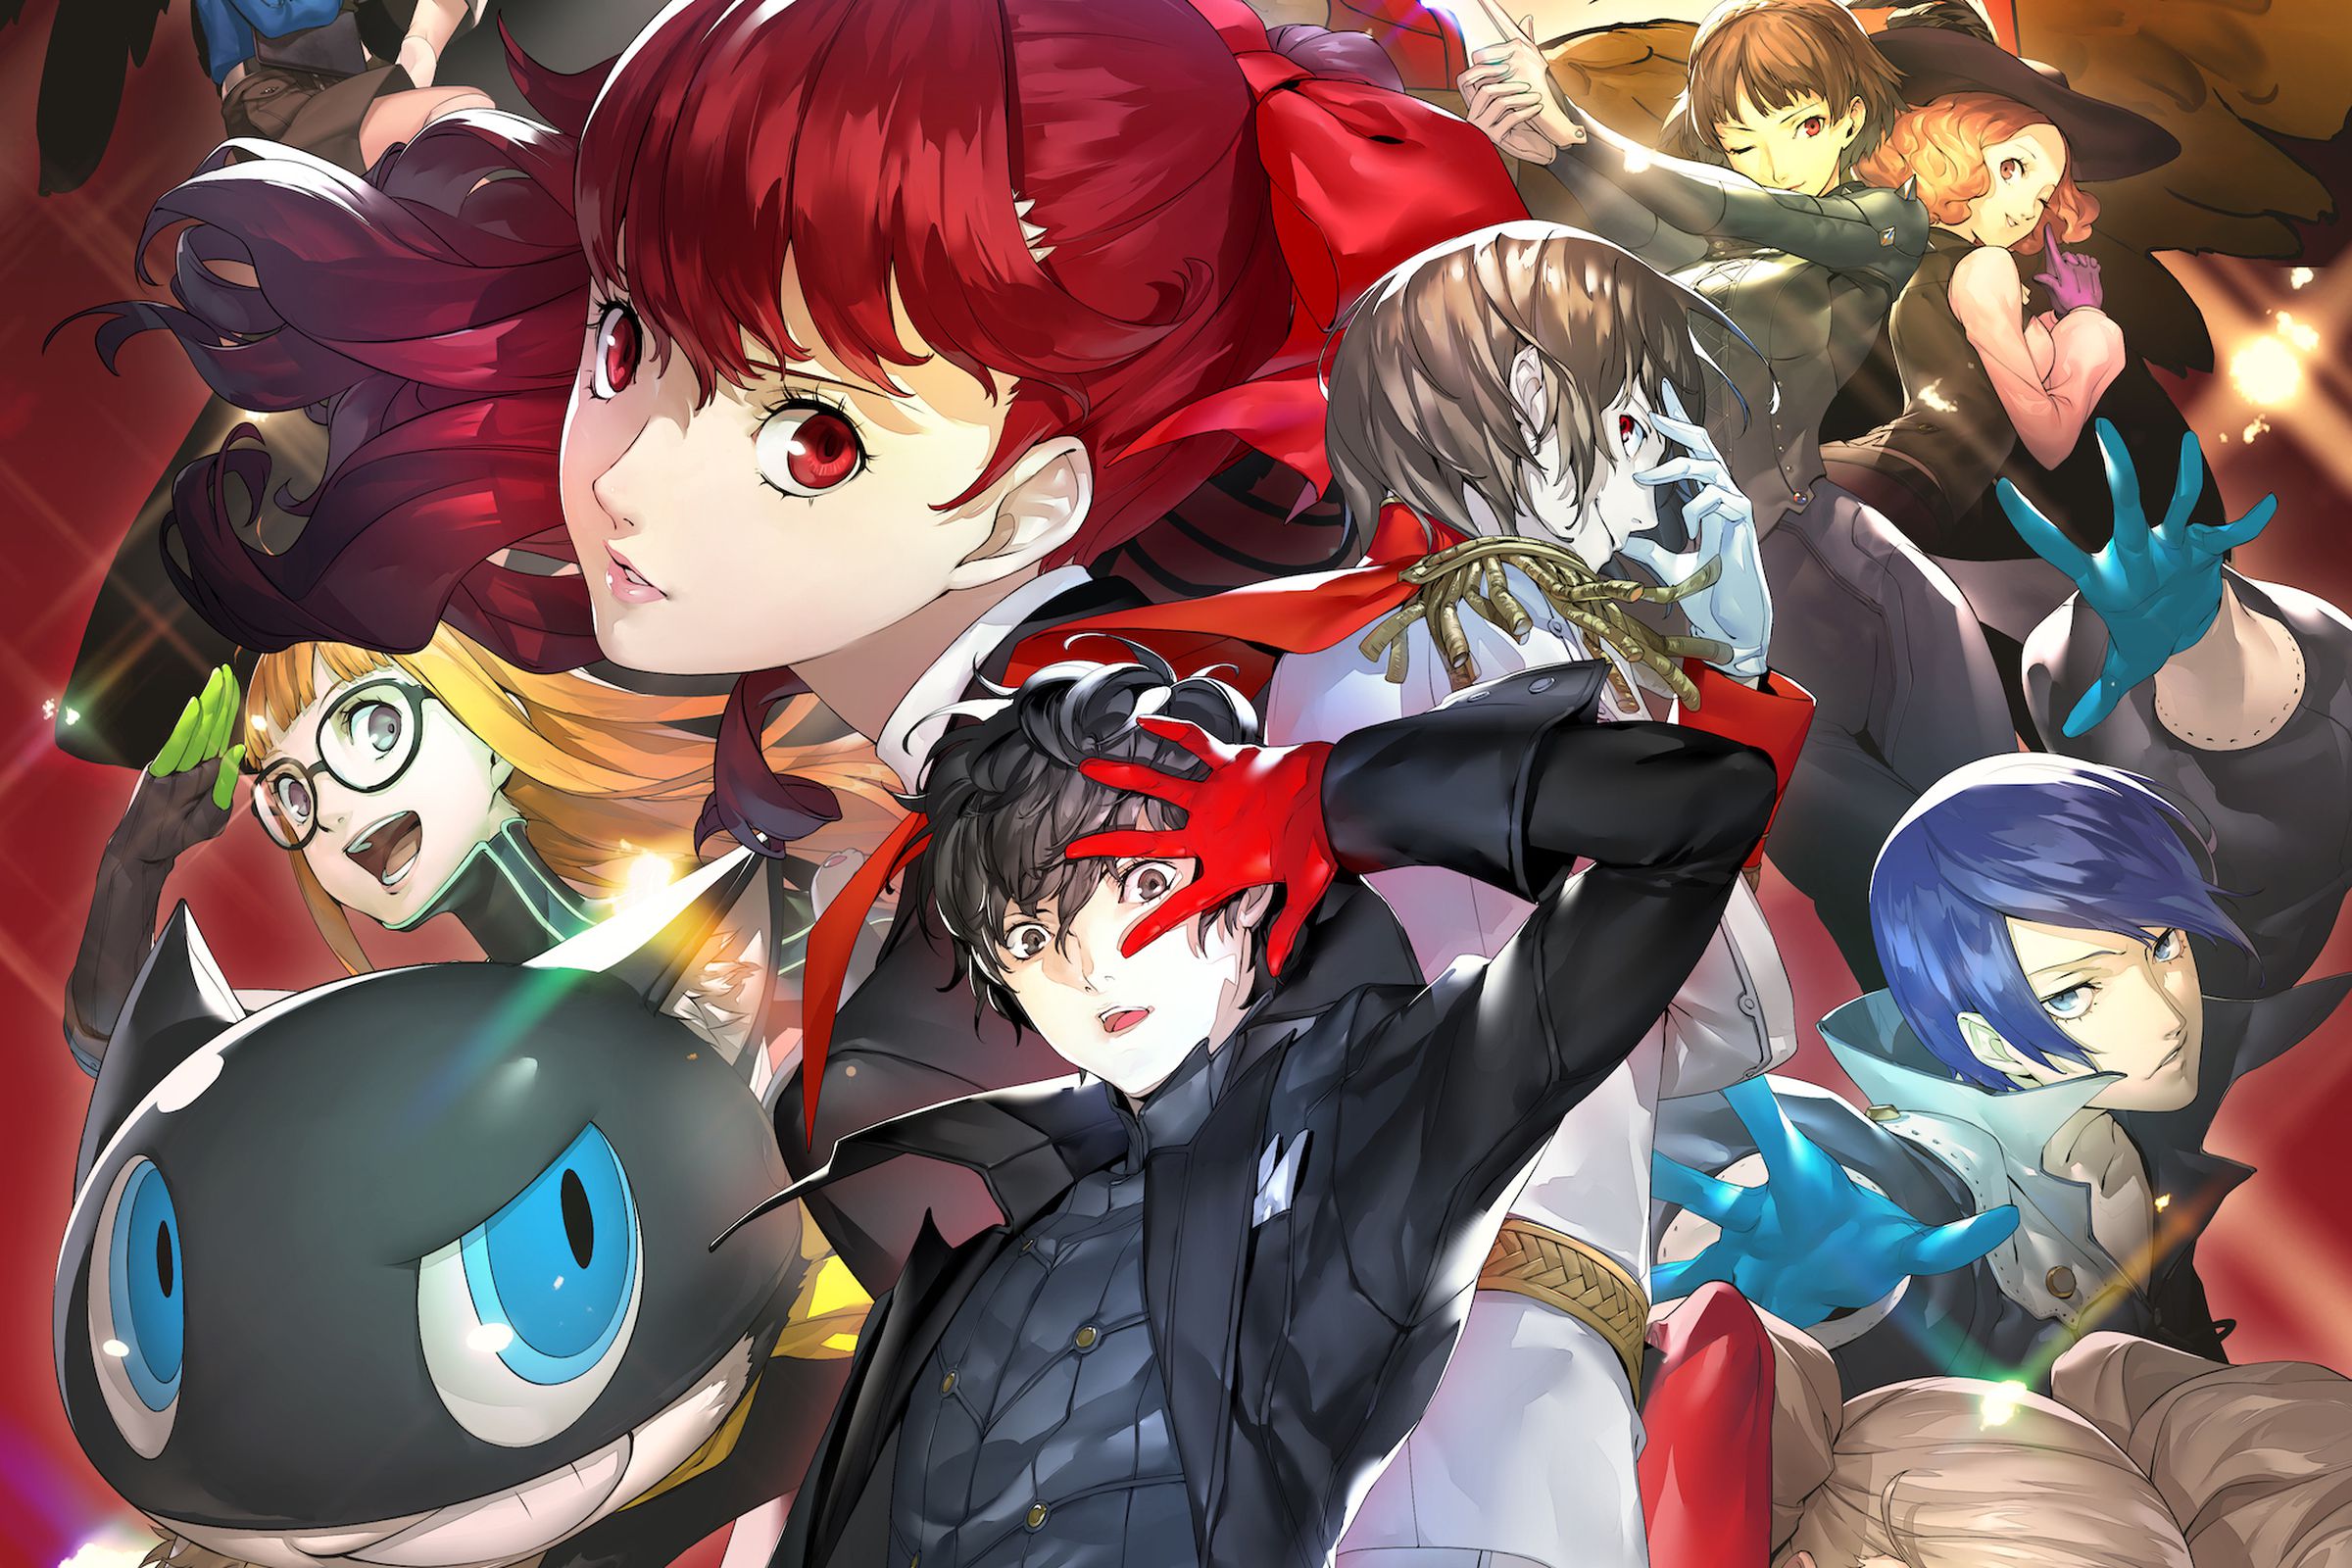 An illustration of characters from Persona 5 Royal.